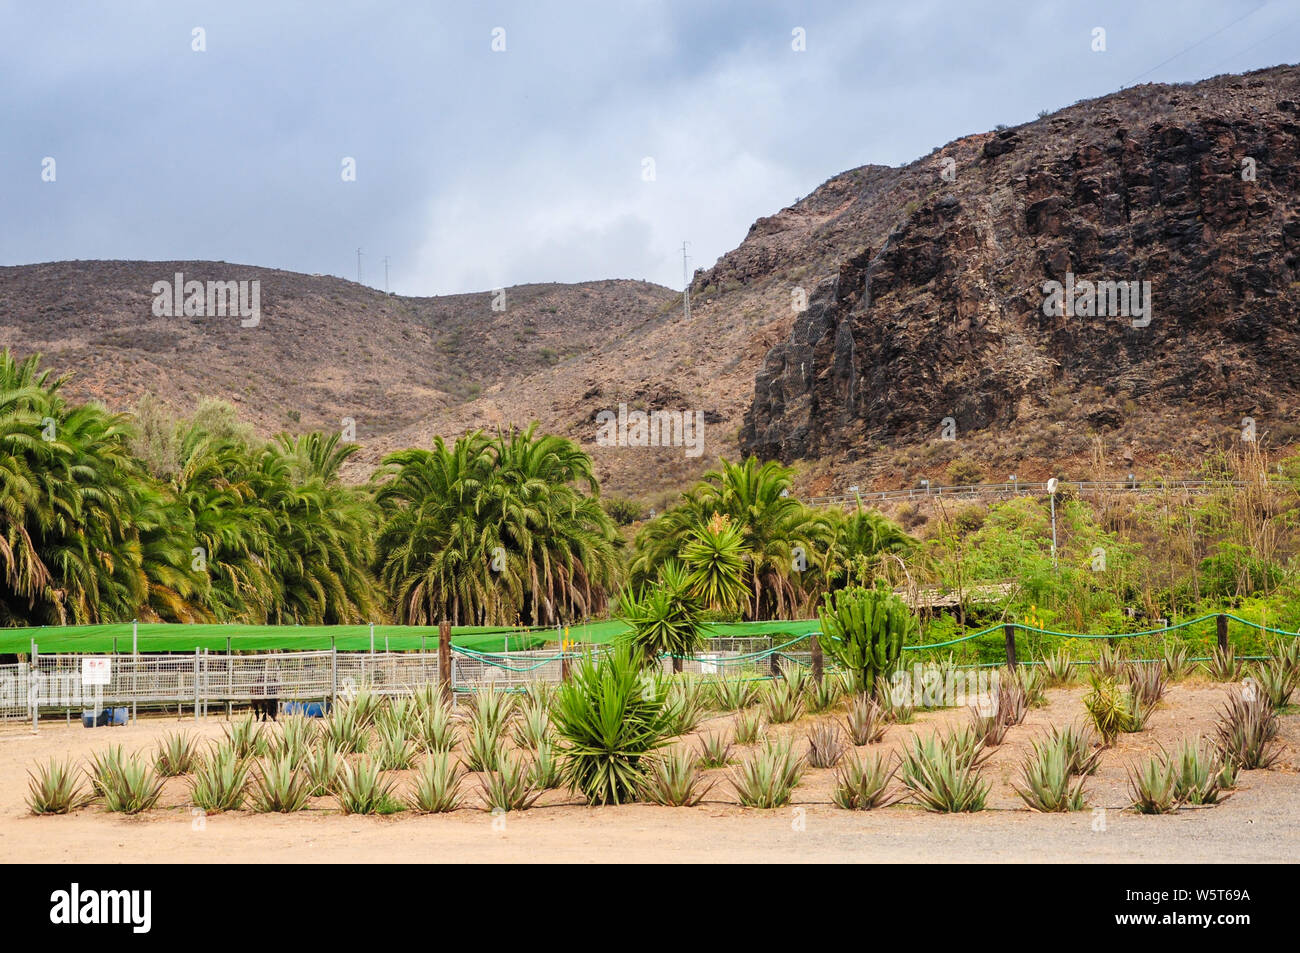 Rows of Aloe vera plants at ecological plantation of this popular canary island plant. Palm trees and mountains in the background. Fataga, Gran Canari Stock Photo